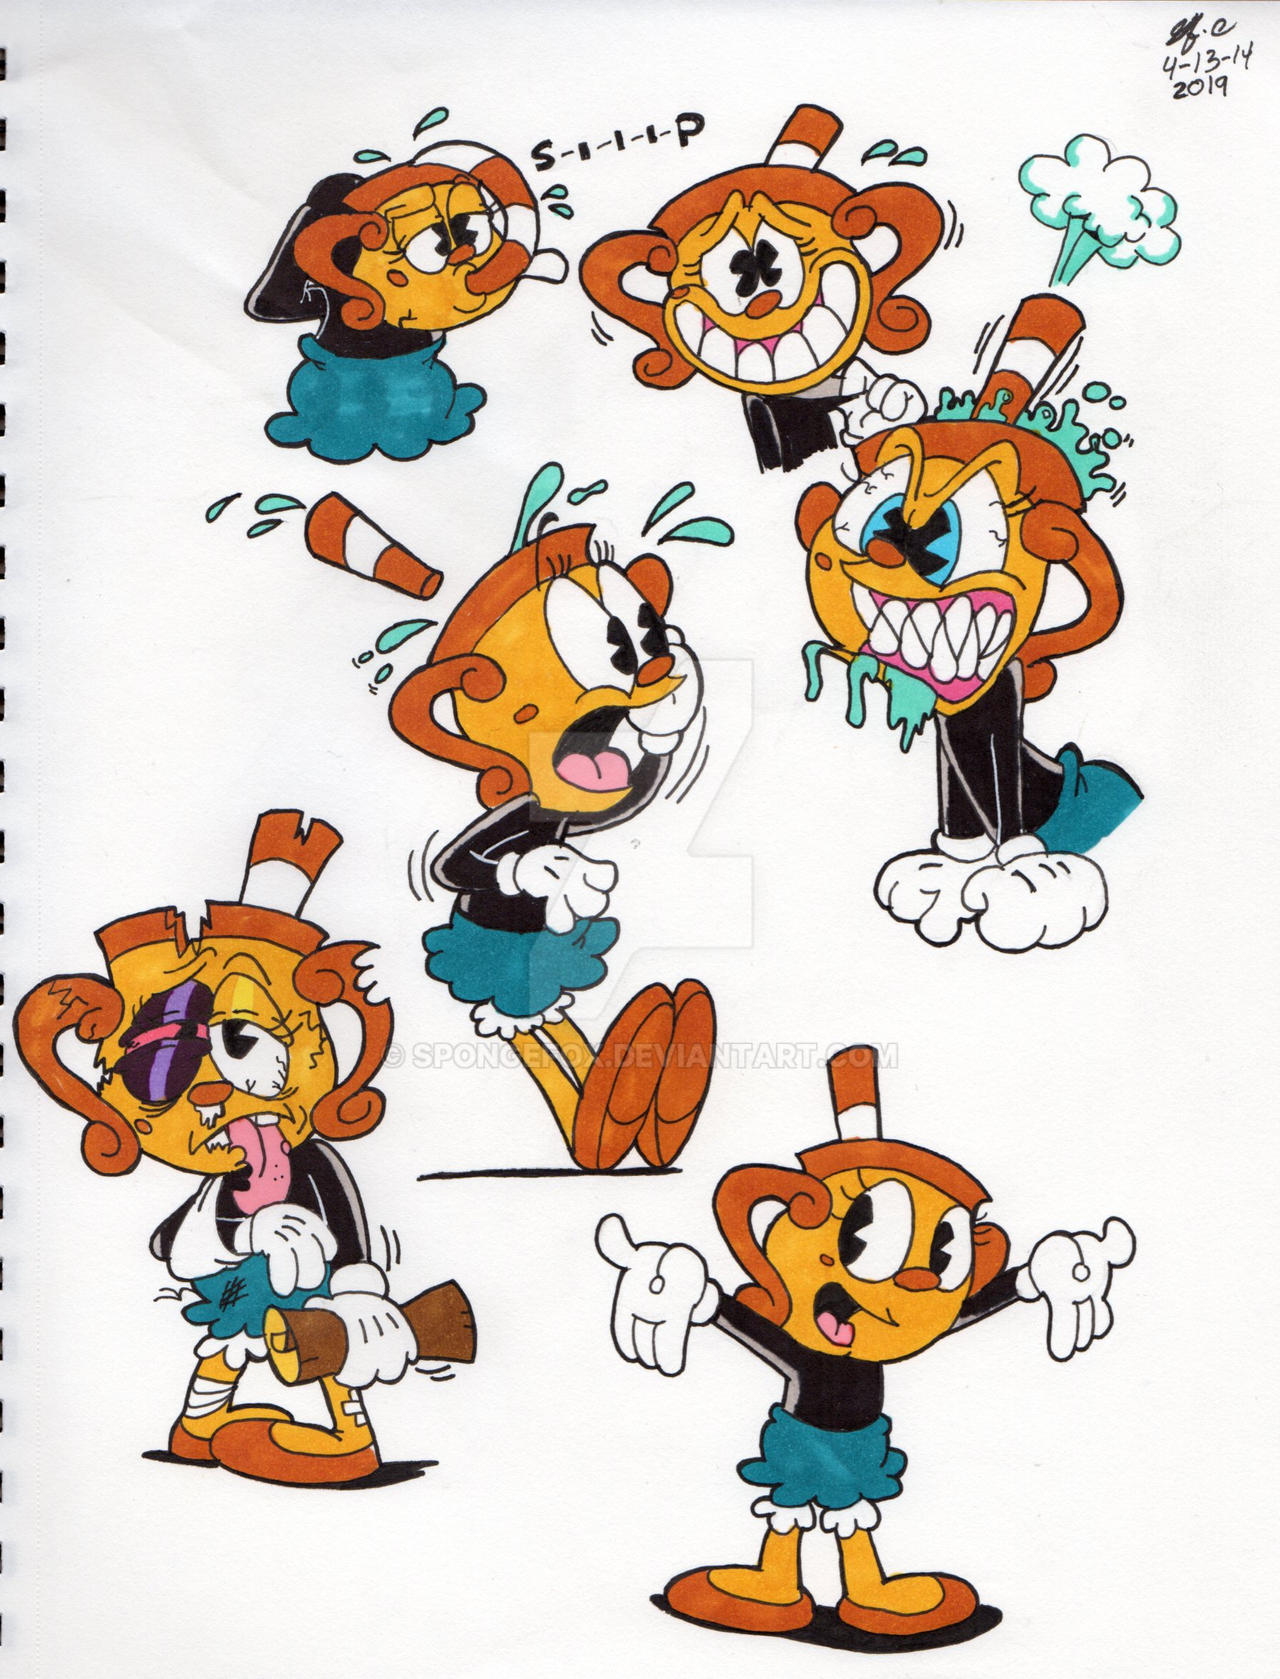 Cuphead Show Ms. Chalice by ArgenInk on DeviantArt